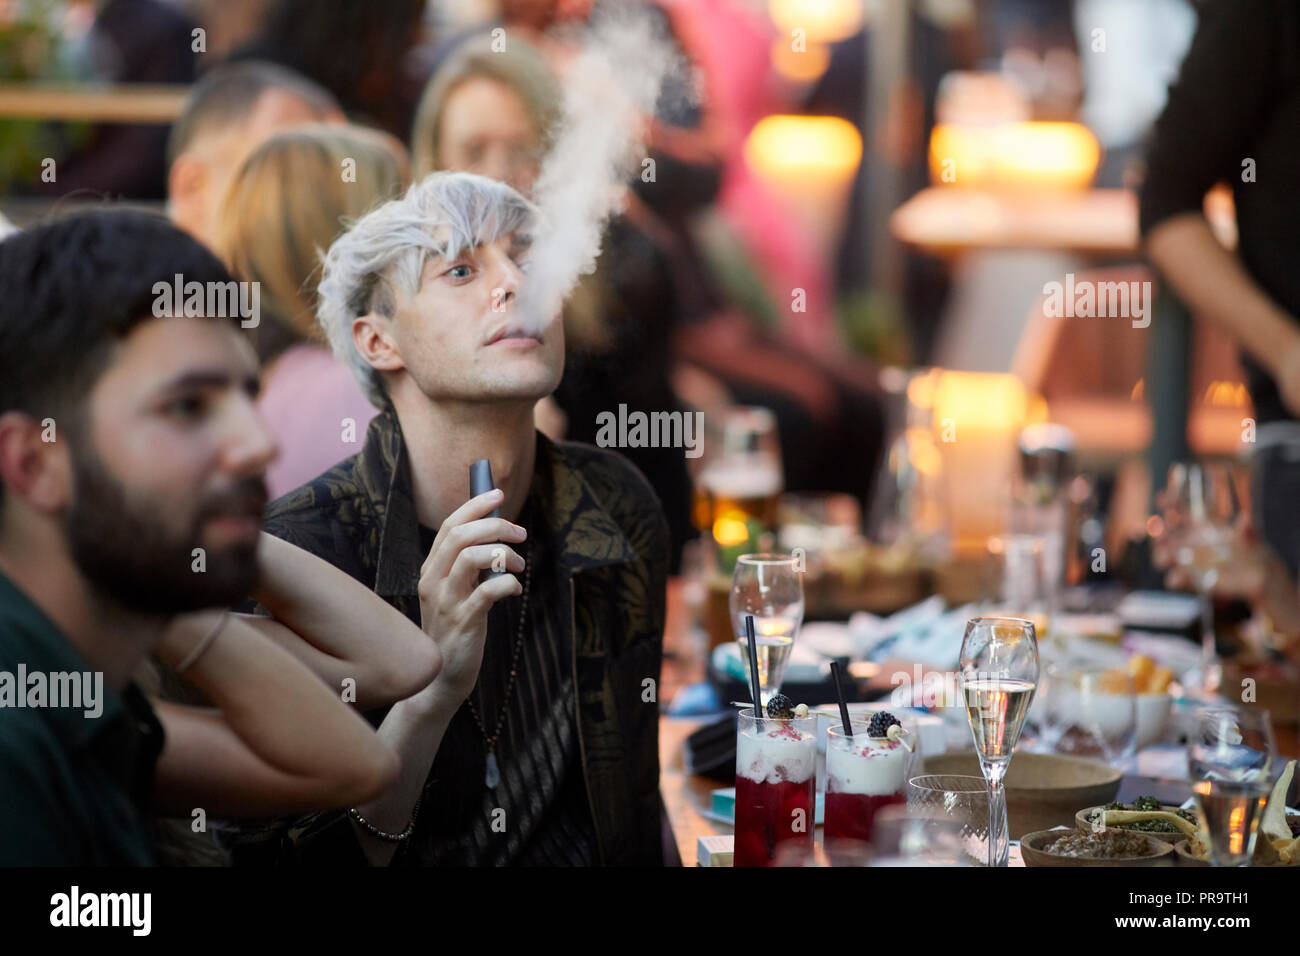 people smoking using vape happing pens in Manchester Stock Photo